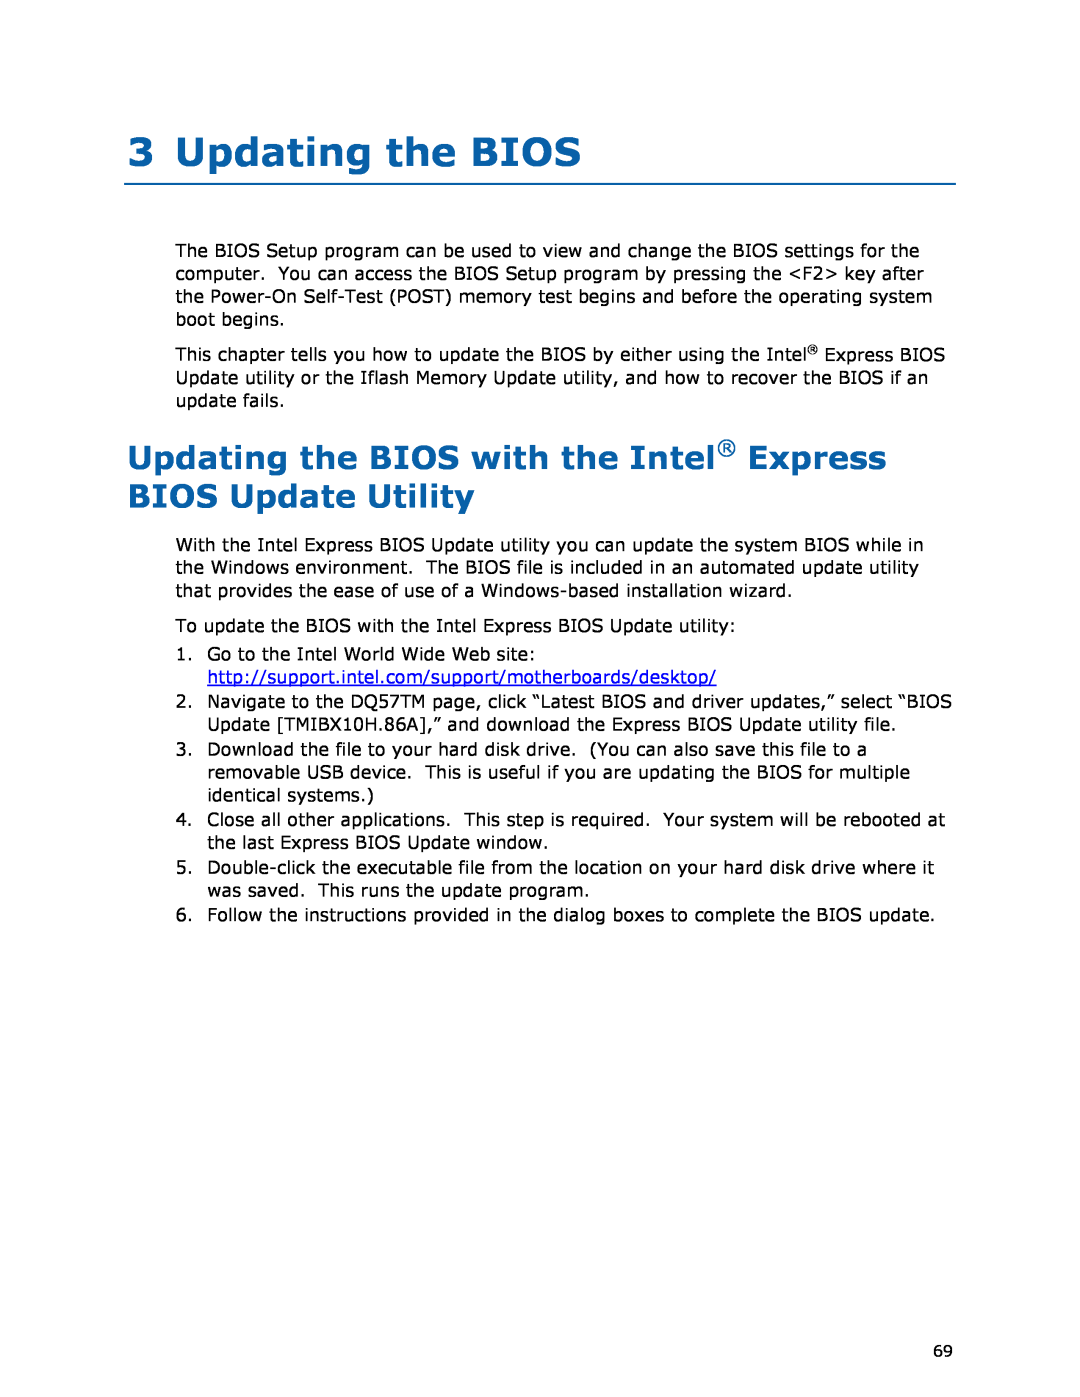 Intel DQ57TM manual Updating the BIOS with the Intel Express, BIOS Update Utility 